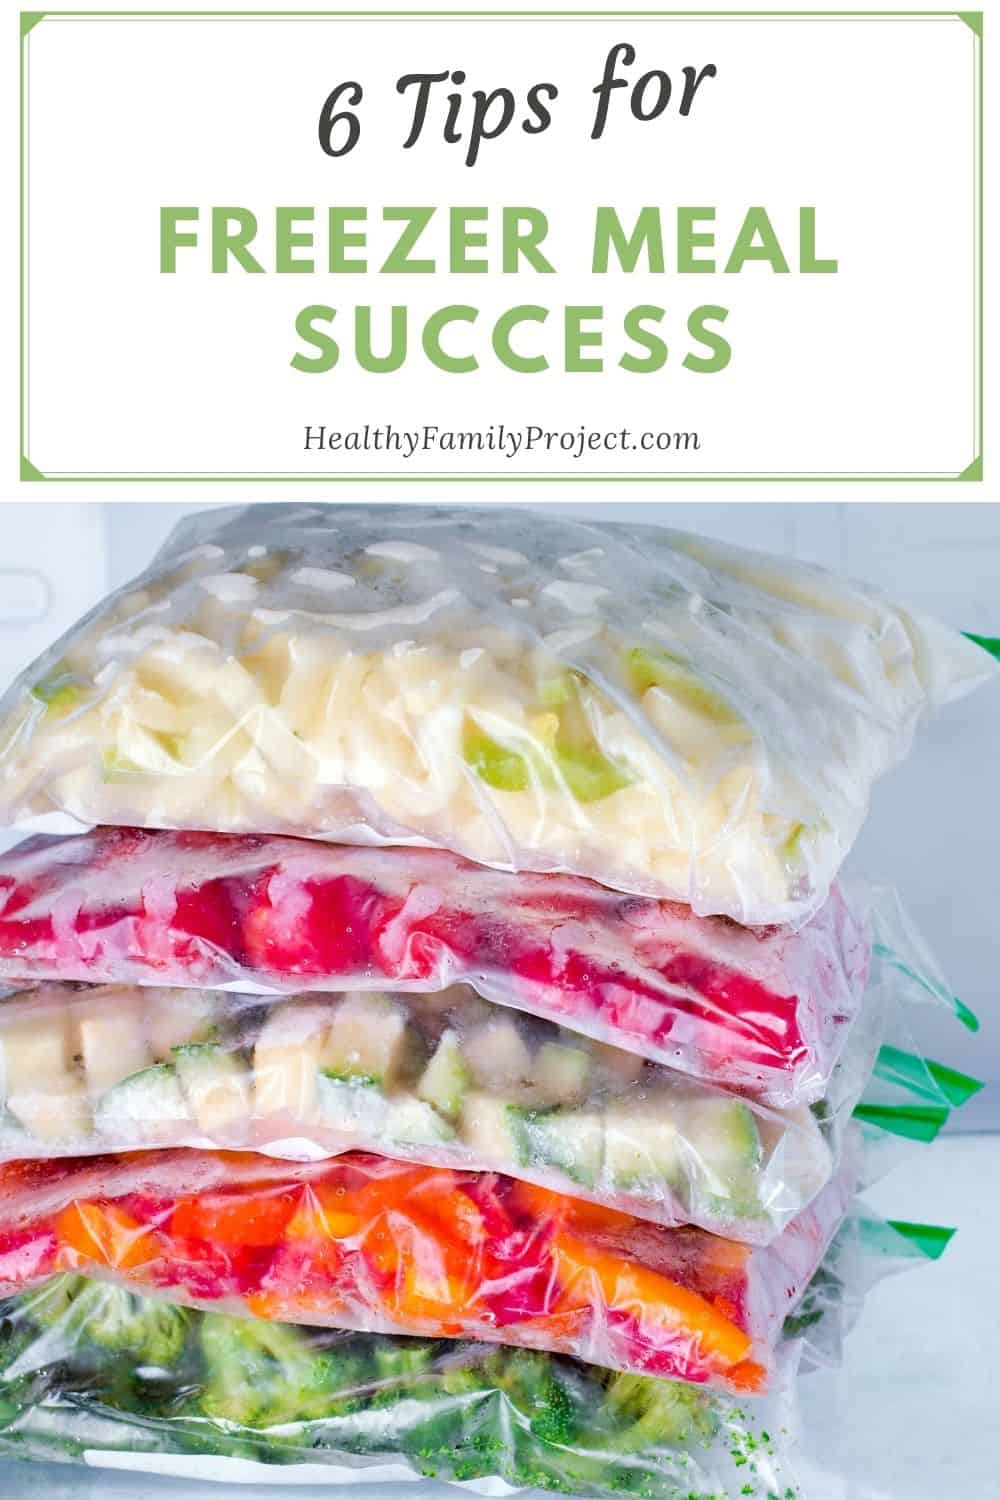 6 easy tips for freezer meal success